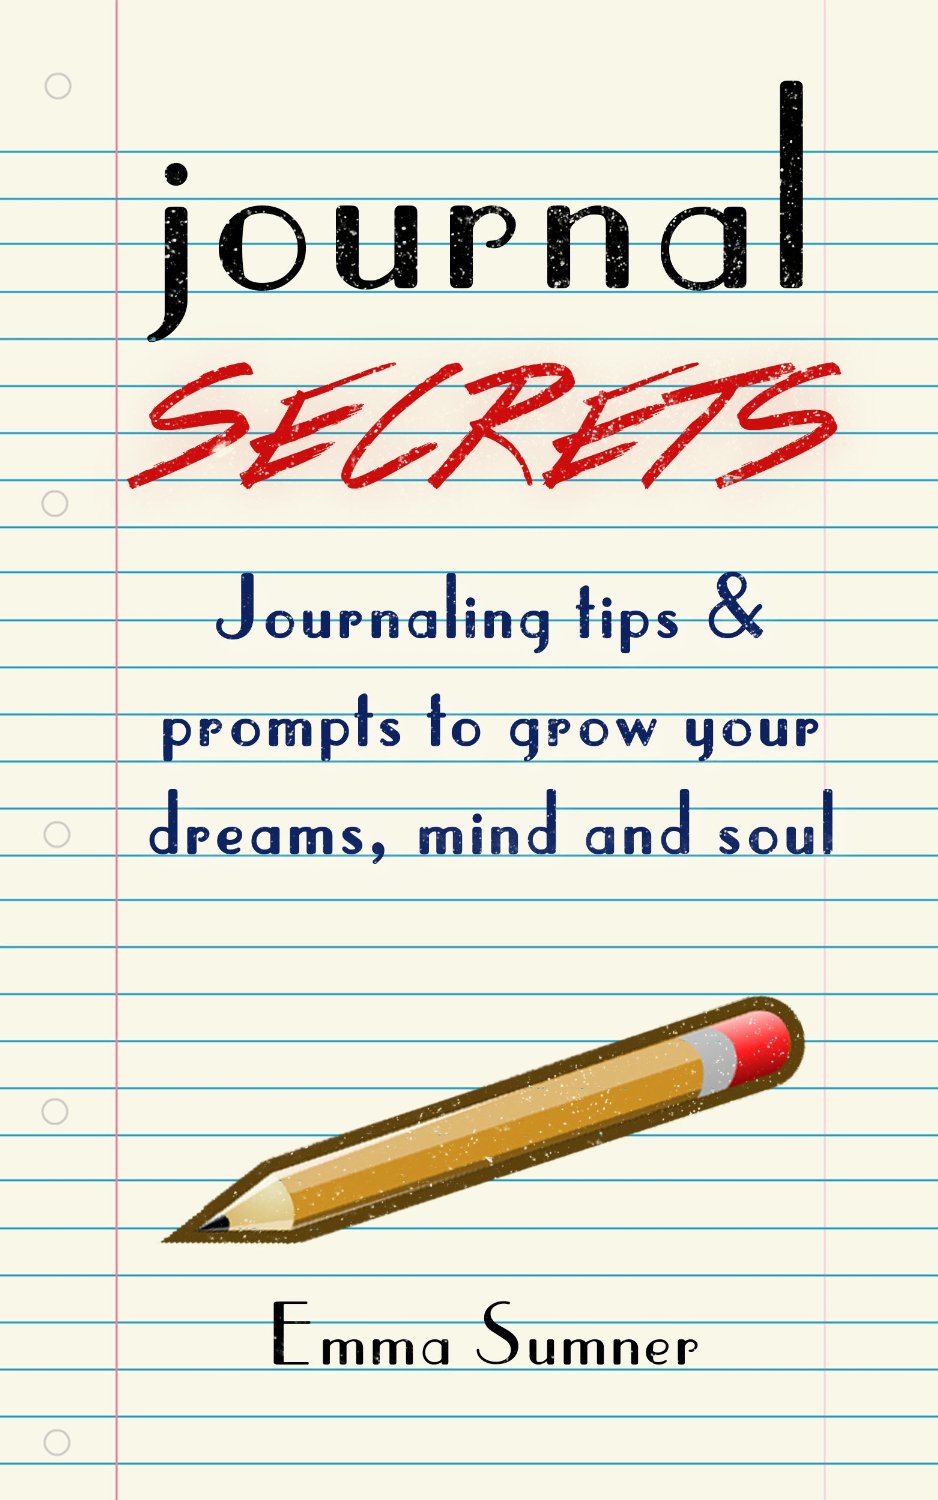 FREE: Journal Secrets – Journaling Tips & Prompts To Grow Your Dreams, Mind & Soul by Emma Sumner